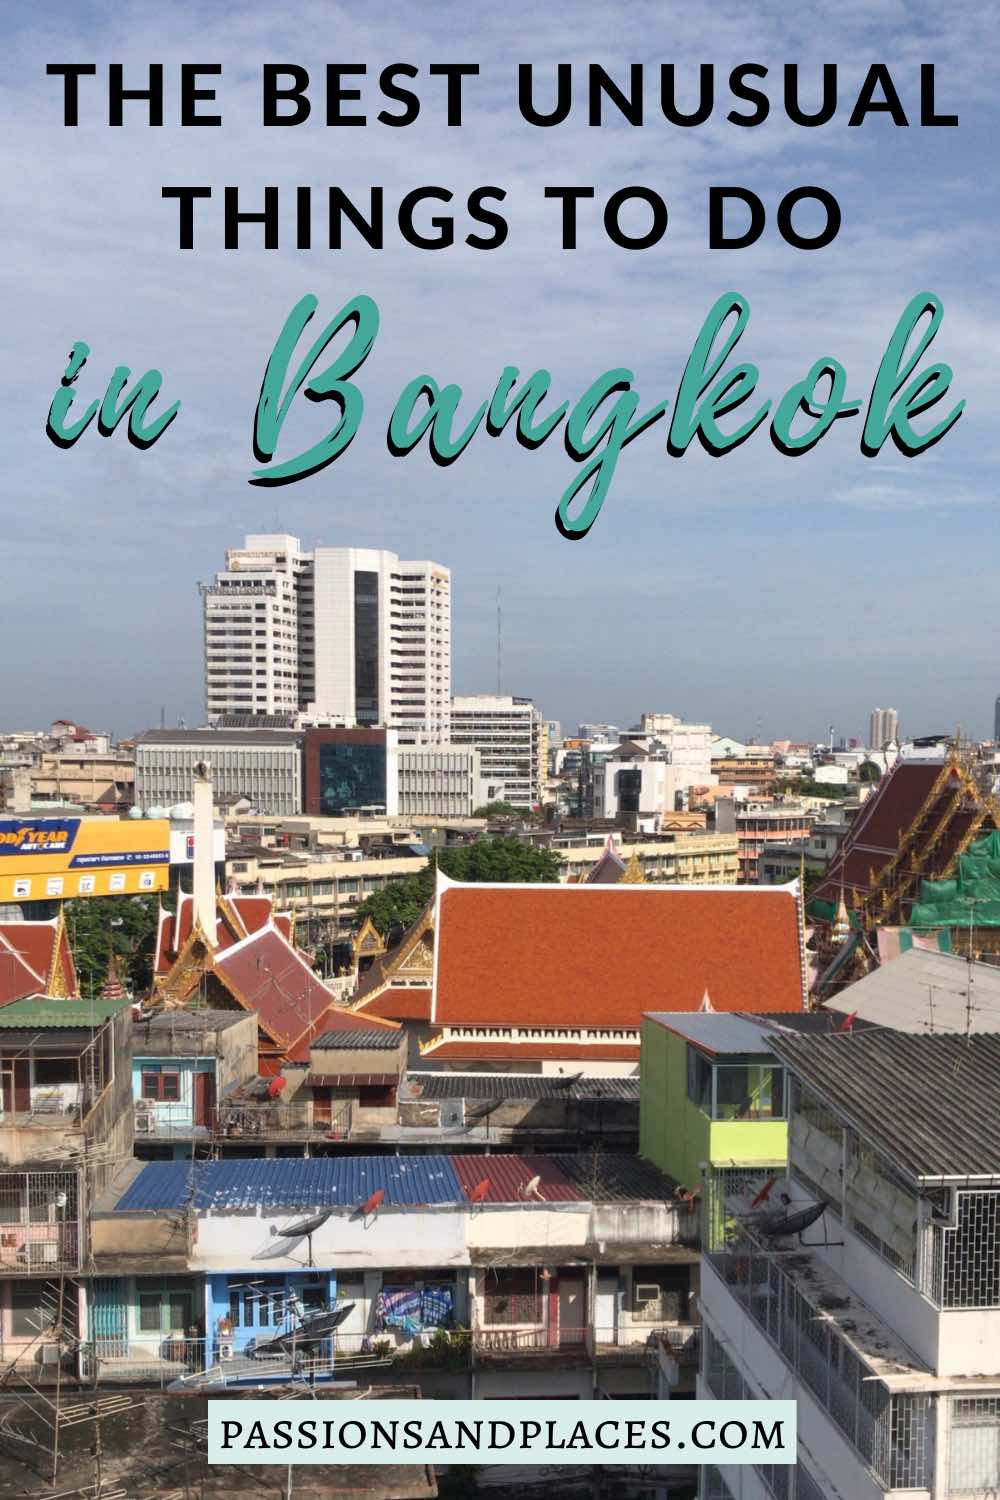 There are so many iconic sights in Bangkok, from the Grand Palace and Wat Arun to Khao San Road. But if you’re looking for something a little different, try this list of non-touristy things to do in Bangkok. From abandoned buildings to one-of-a-kind restaurants, these are some of the weirdest things to do - and maybe the most memorable. #Bangkok #Thailand #offthebeatenpath